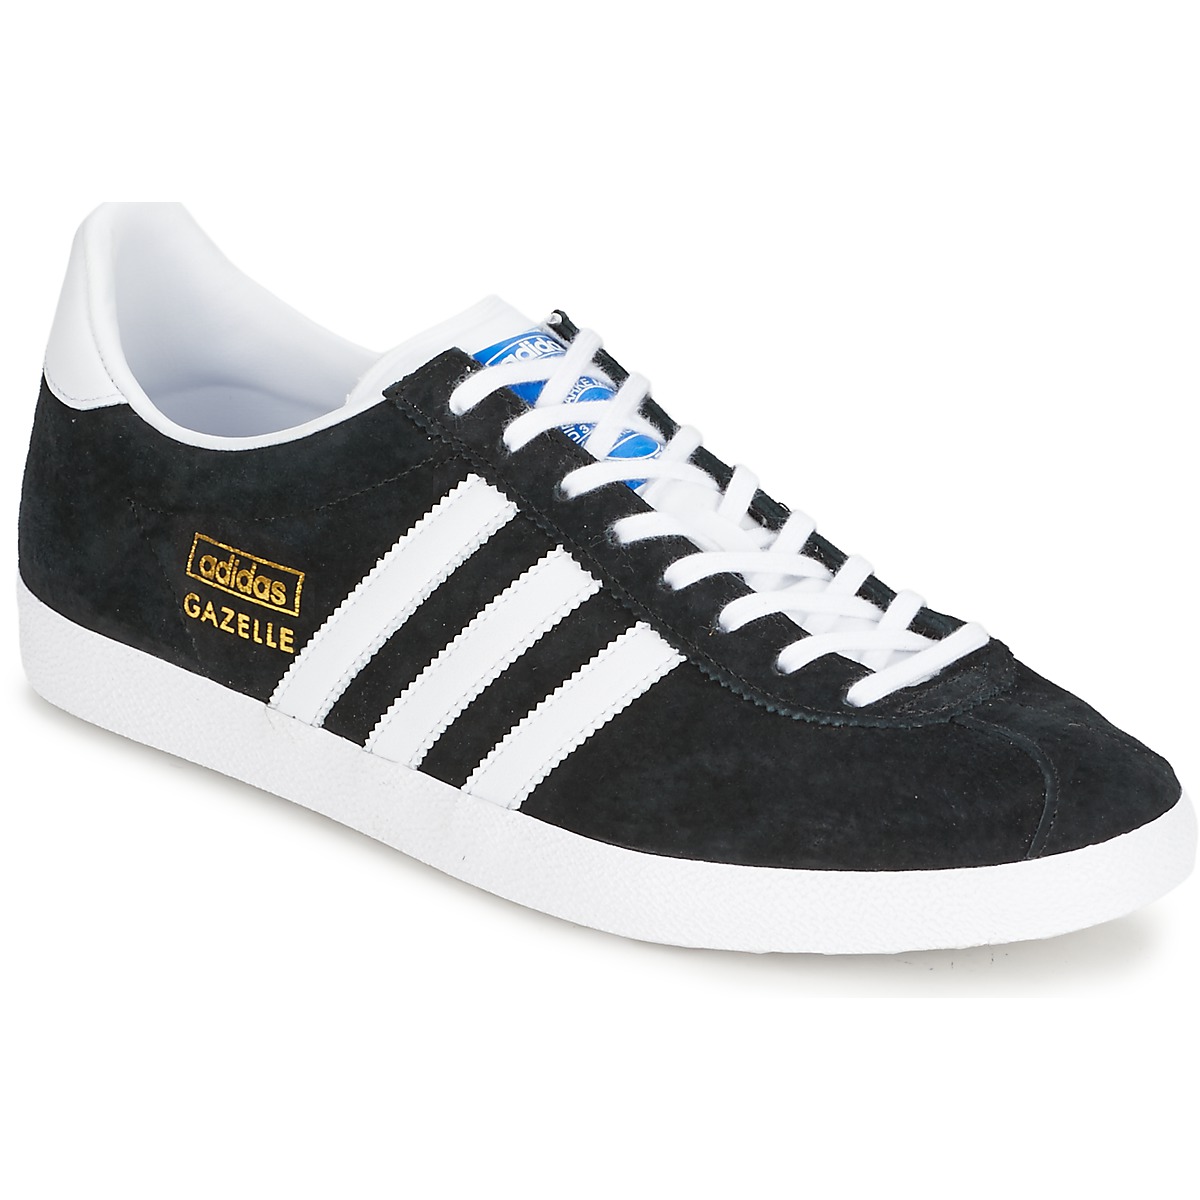 gazelle adidas 37 adidas Shoes & Sneakers On Sale